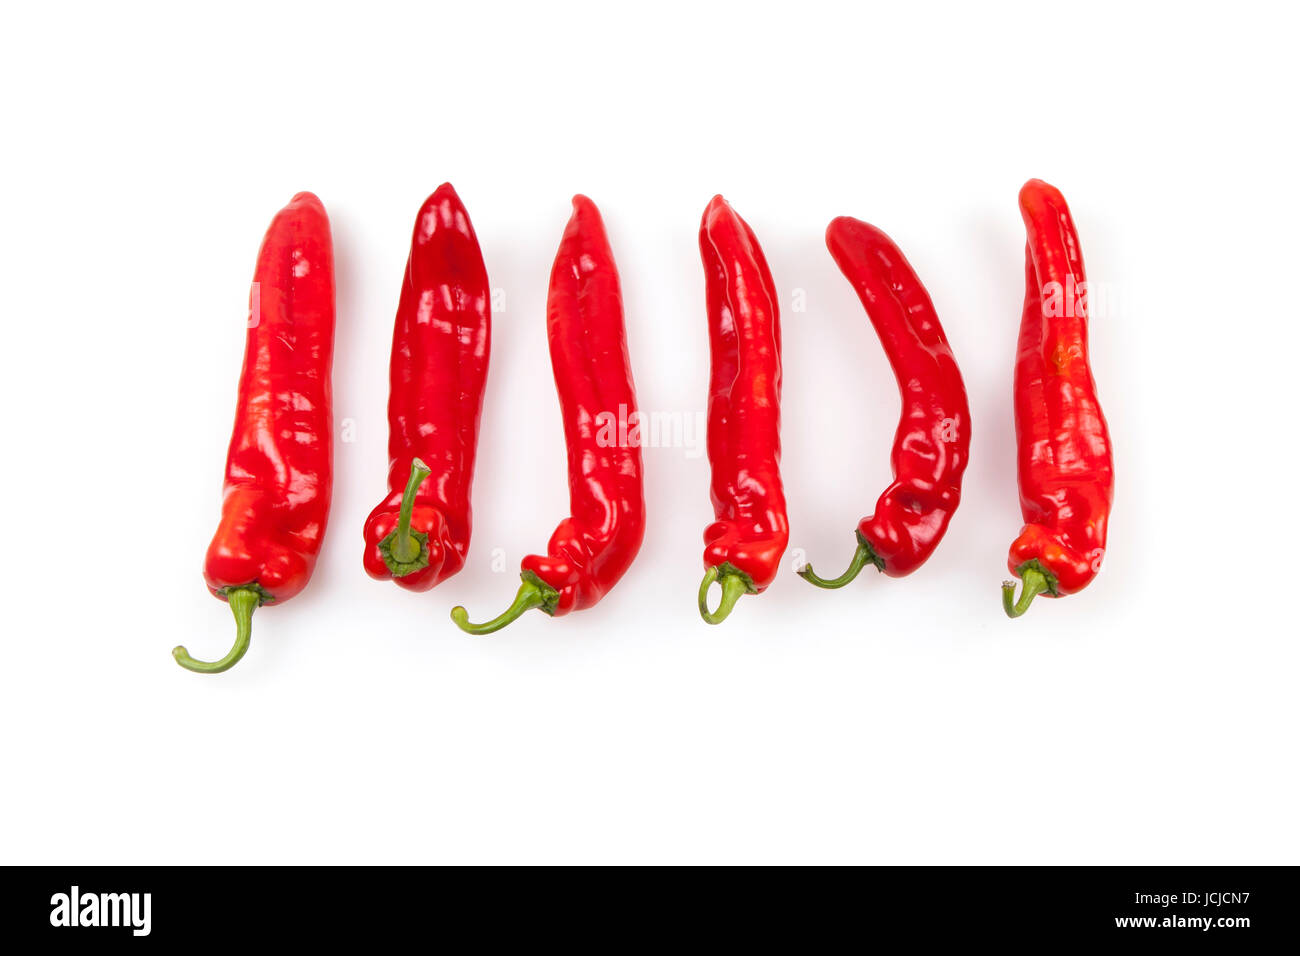 Red and spicy Paprika Chili Peppers Stock Photo